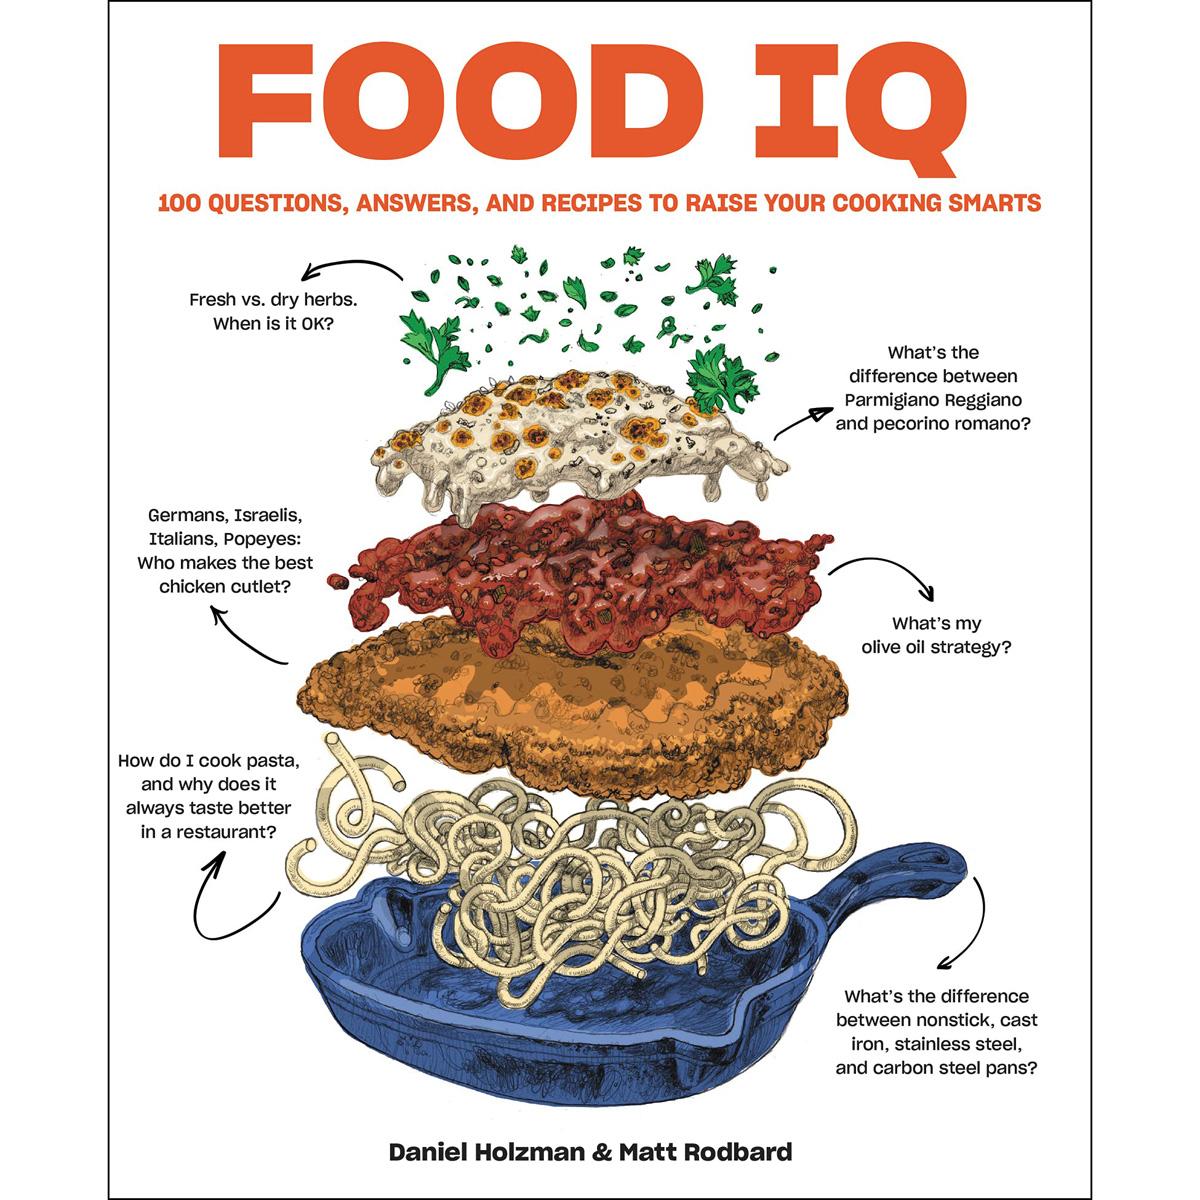 Food IQ 100 Questions and Answers eBook for $1.99